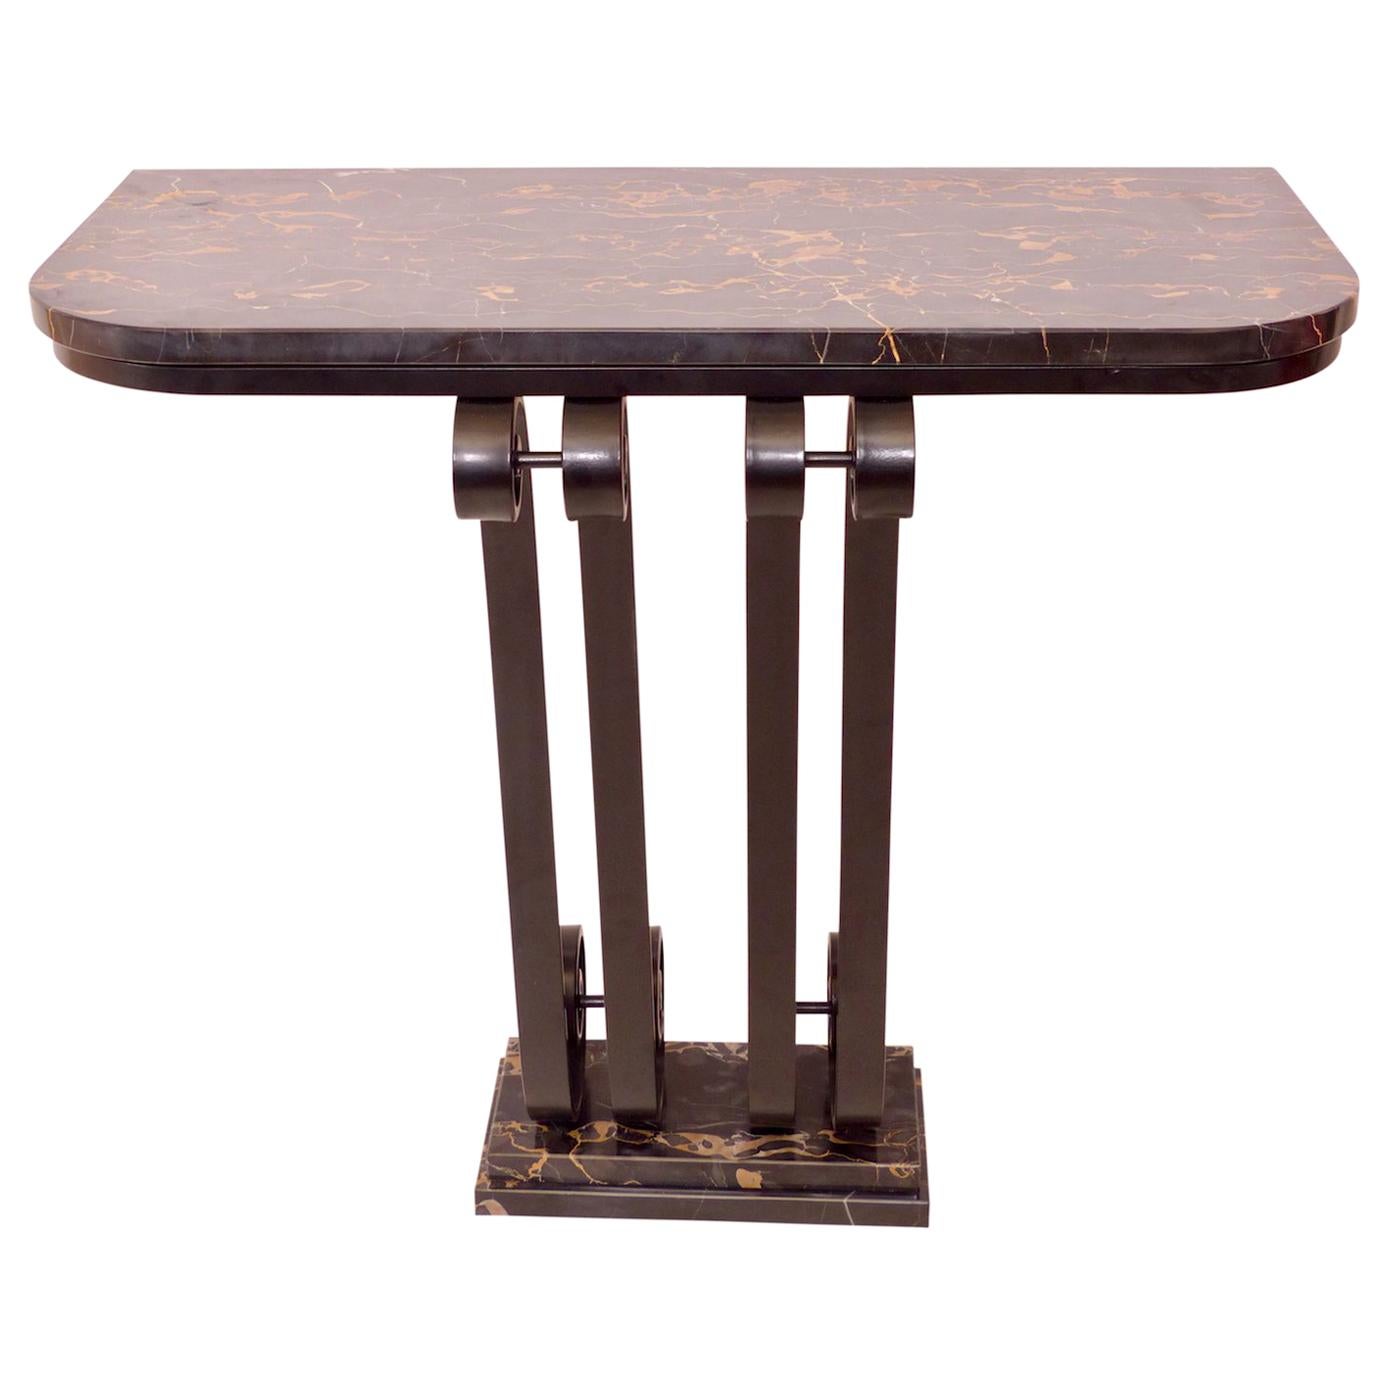 French Art Deco Console Table in Wrought Iron and Portor Marble, 1920s For Sale